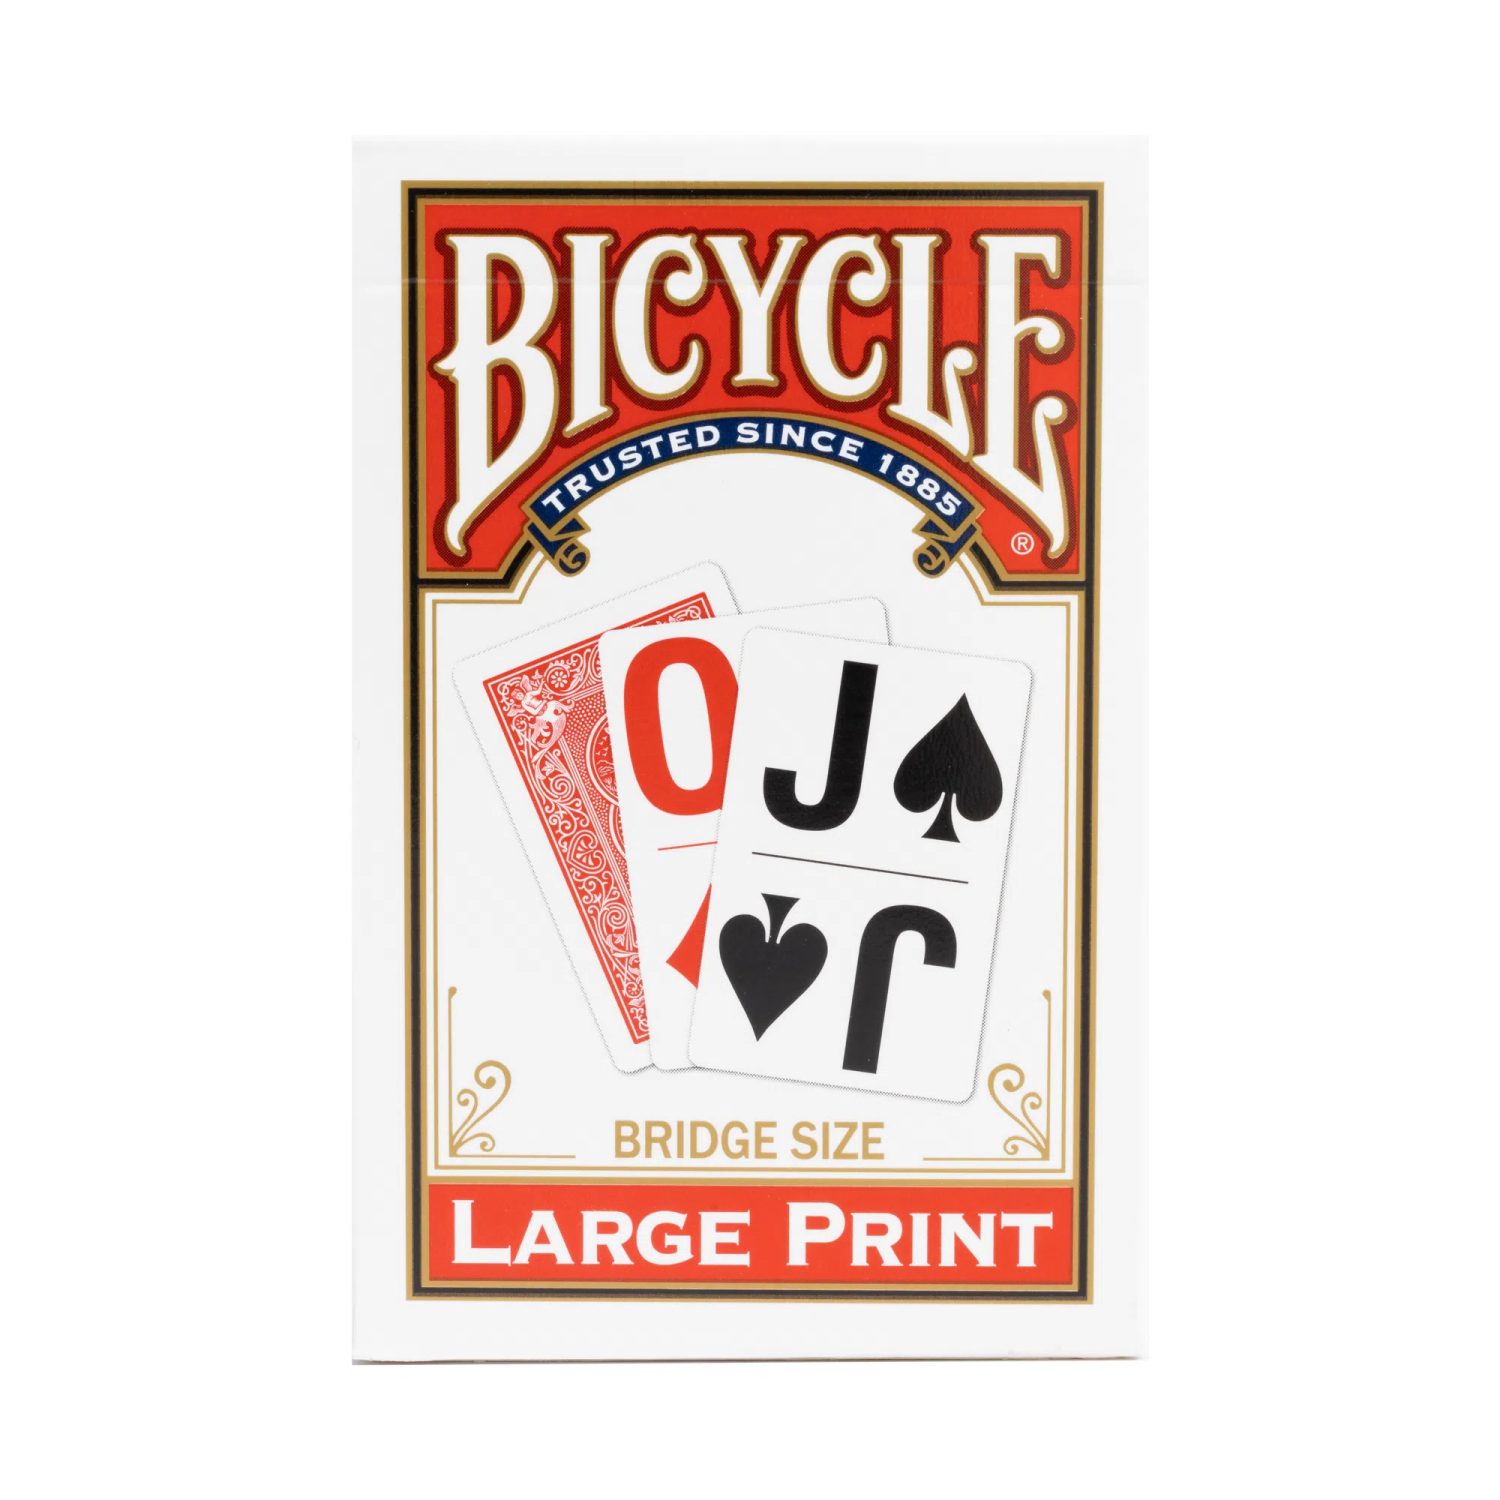 Image of a Pack of Bicycle Bridge Size Large Print Playing Cards